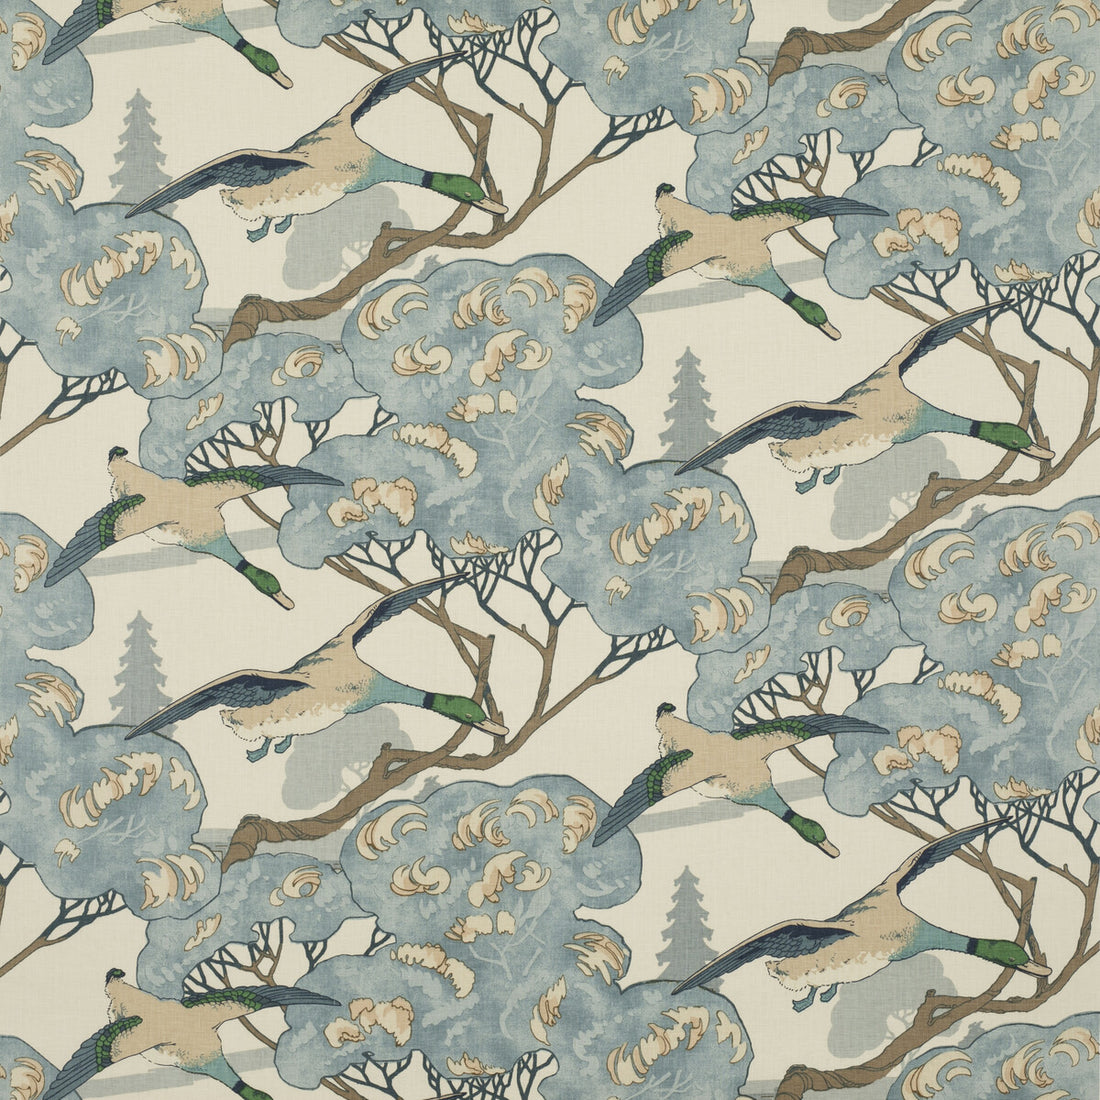 Flying Ducks fabric in blue color - pattern FD205.H101.0 - by Mulberry in the Icons Fabrics collection